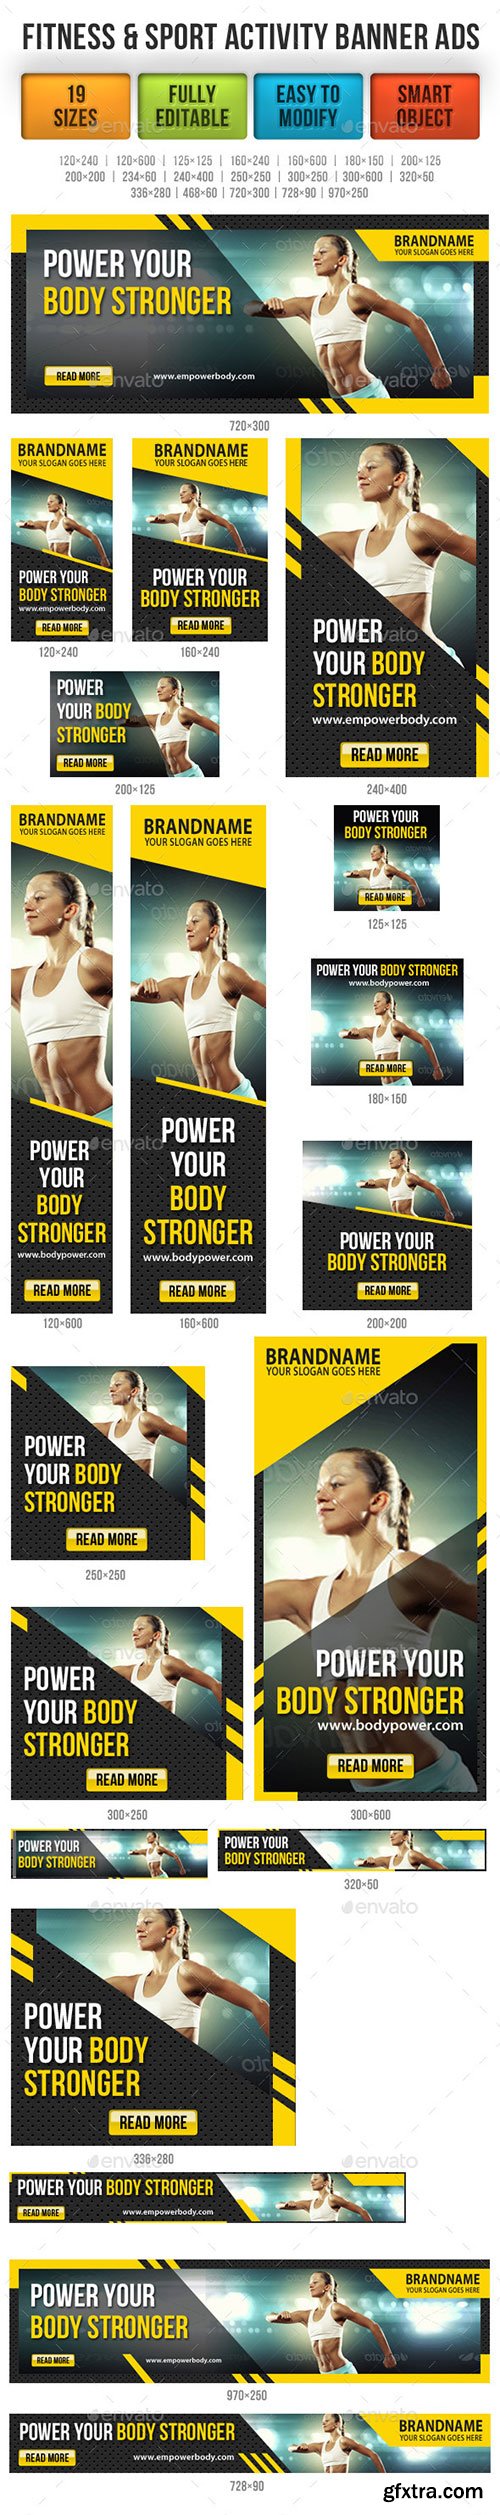 GraphicRiver - Fitness & Sport Activity Banner Ads